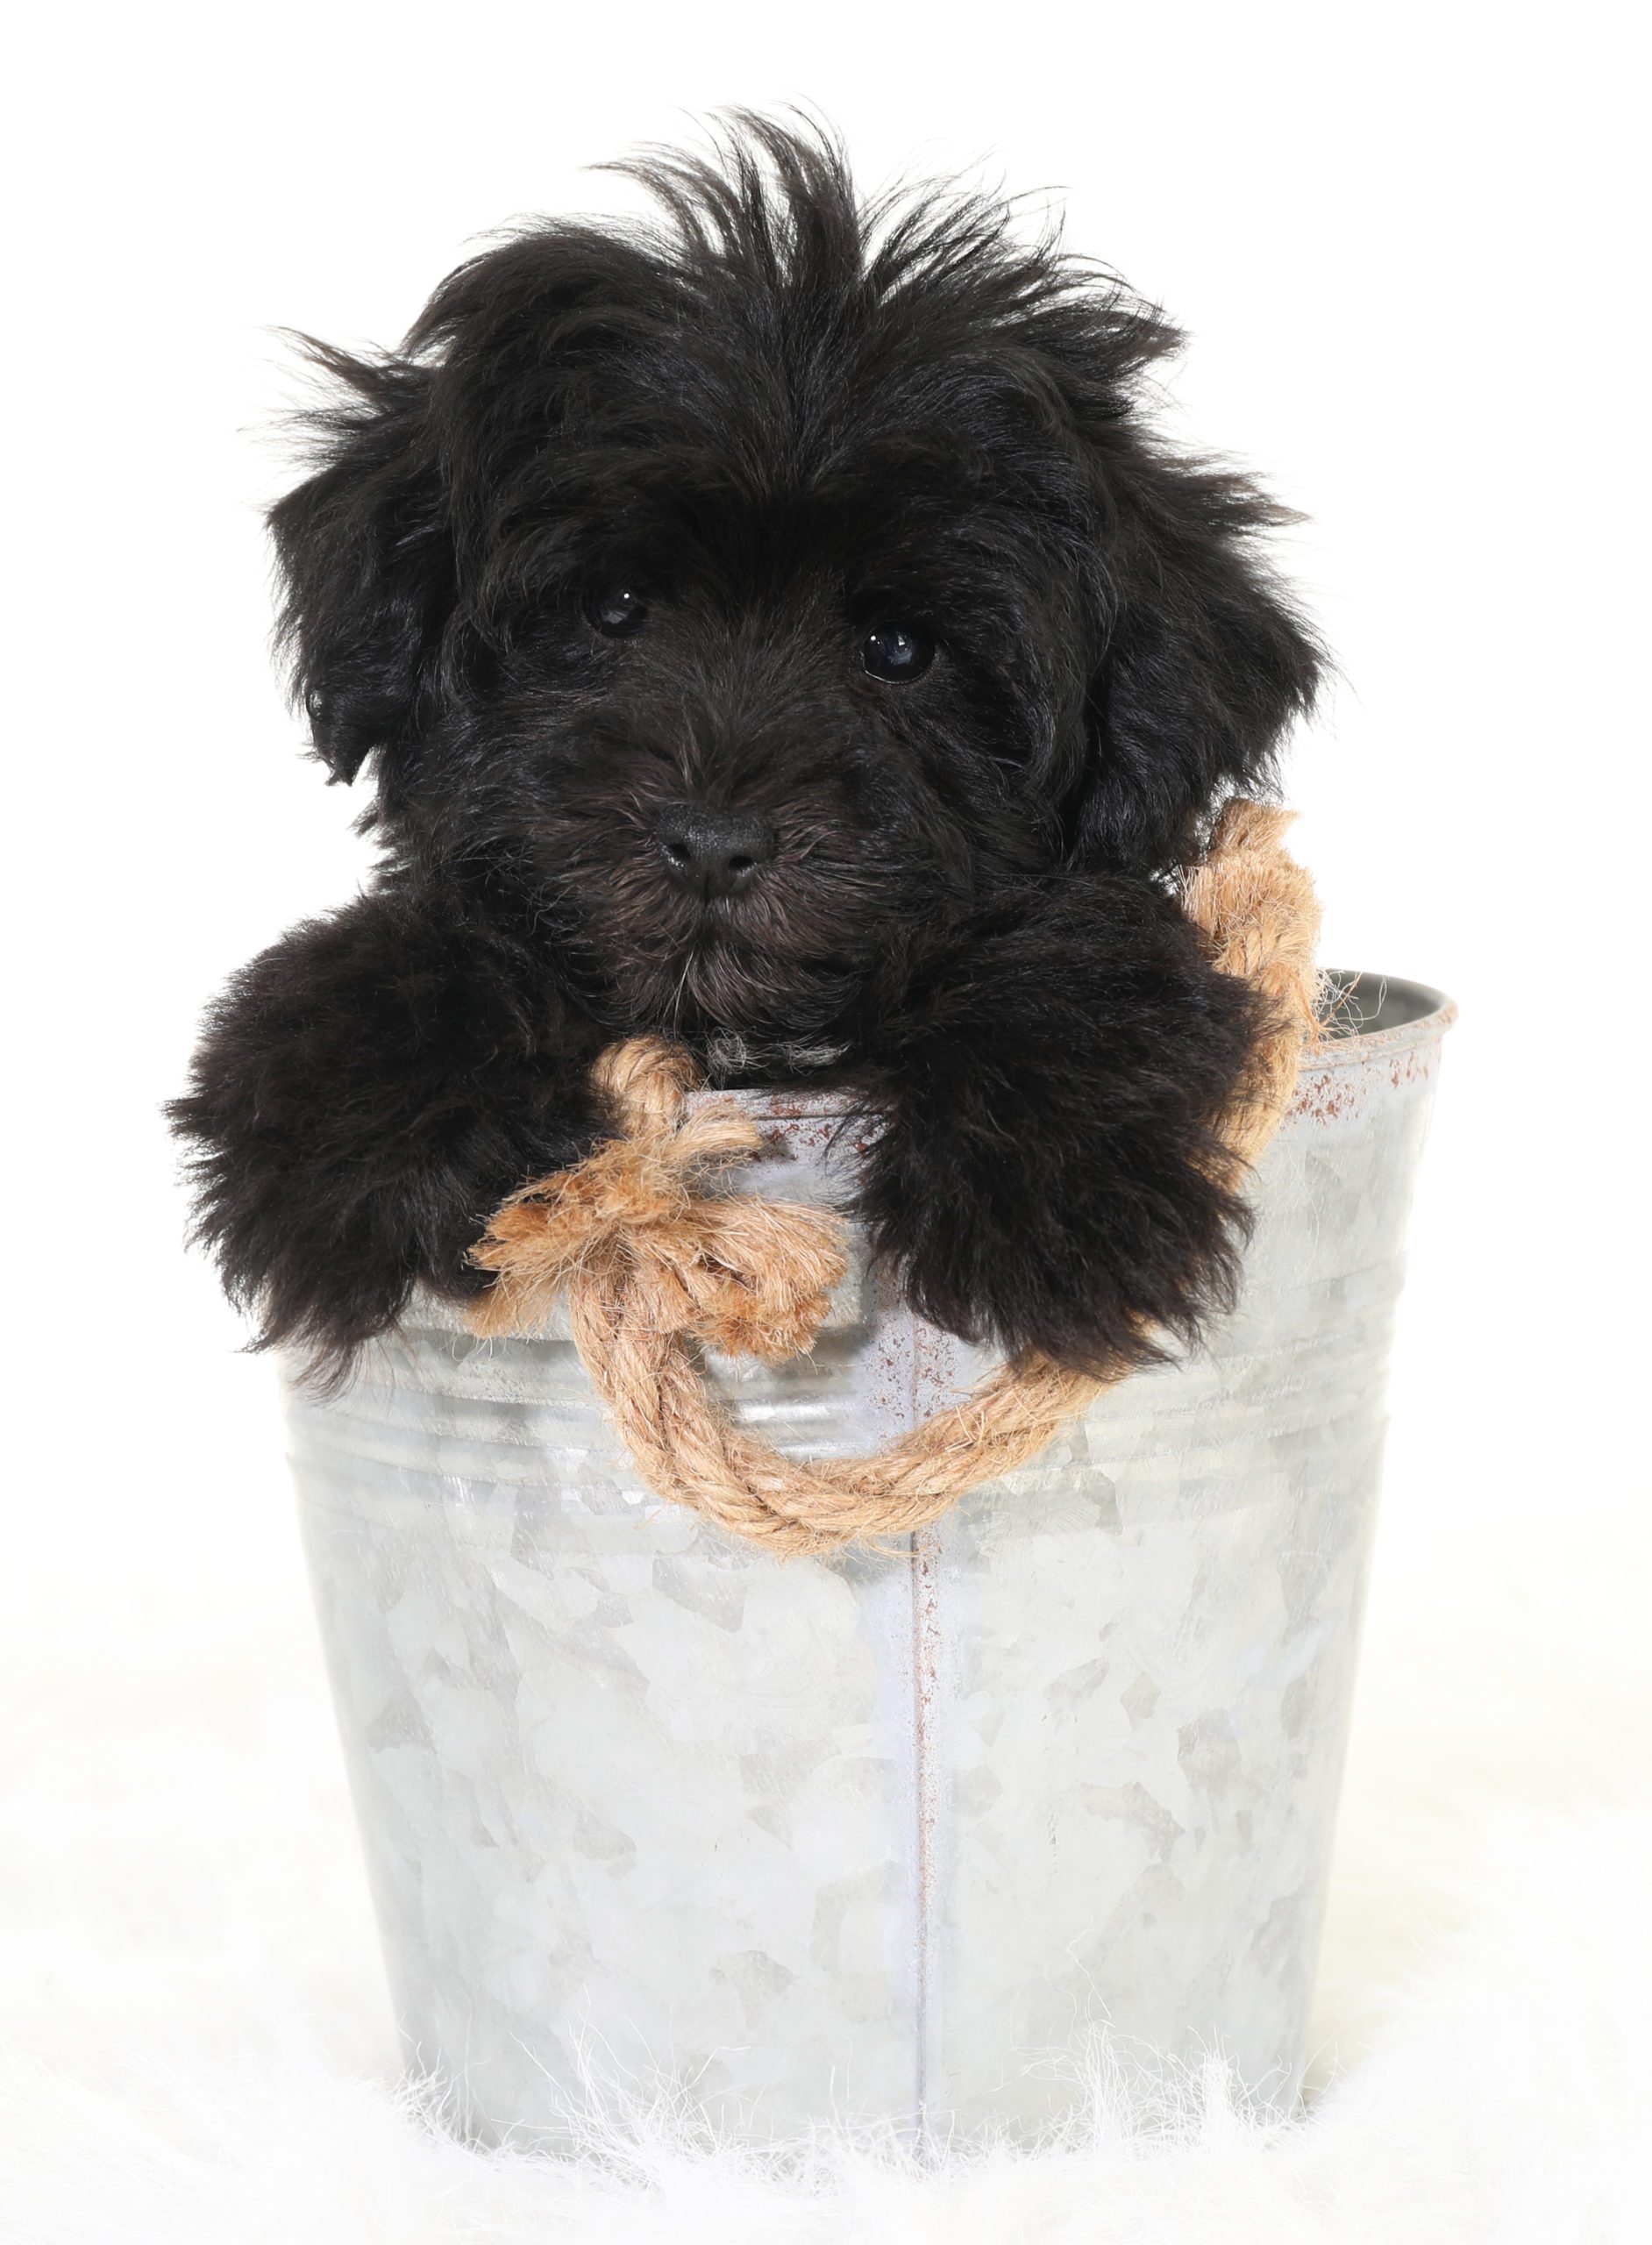 A black golden doodle puppy in a bucket for a photo shoot.